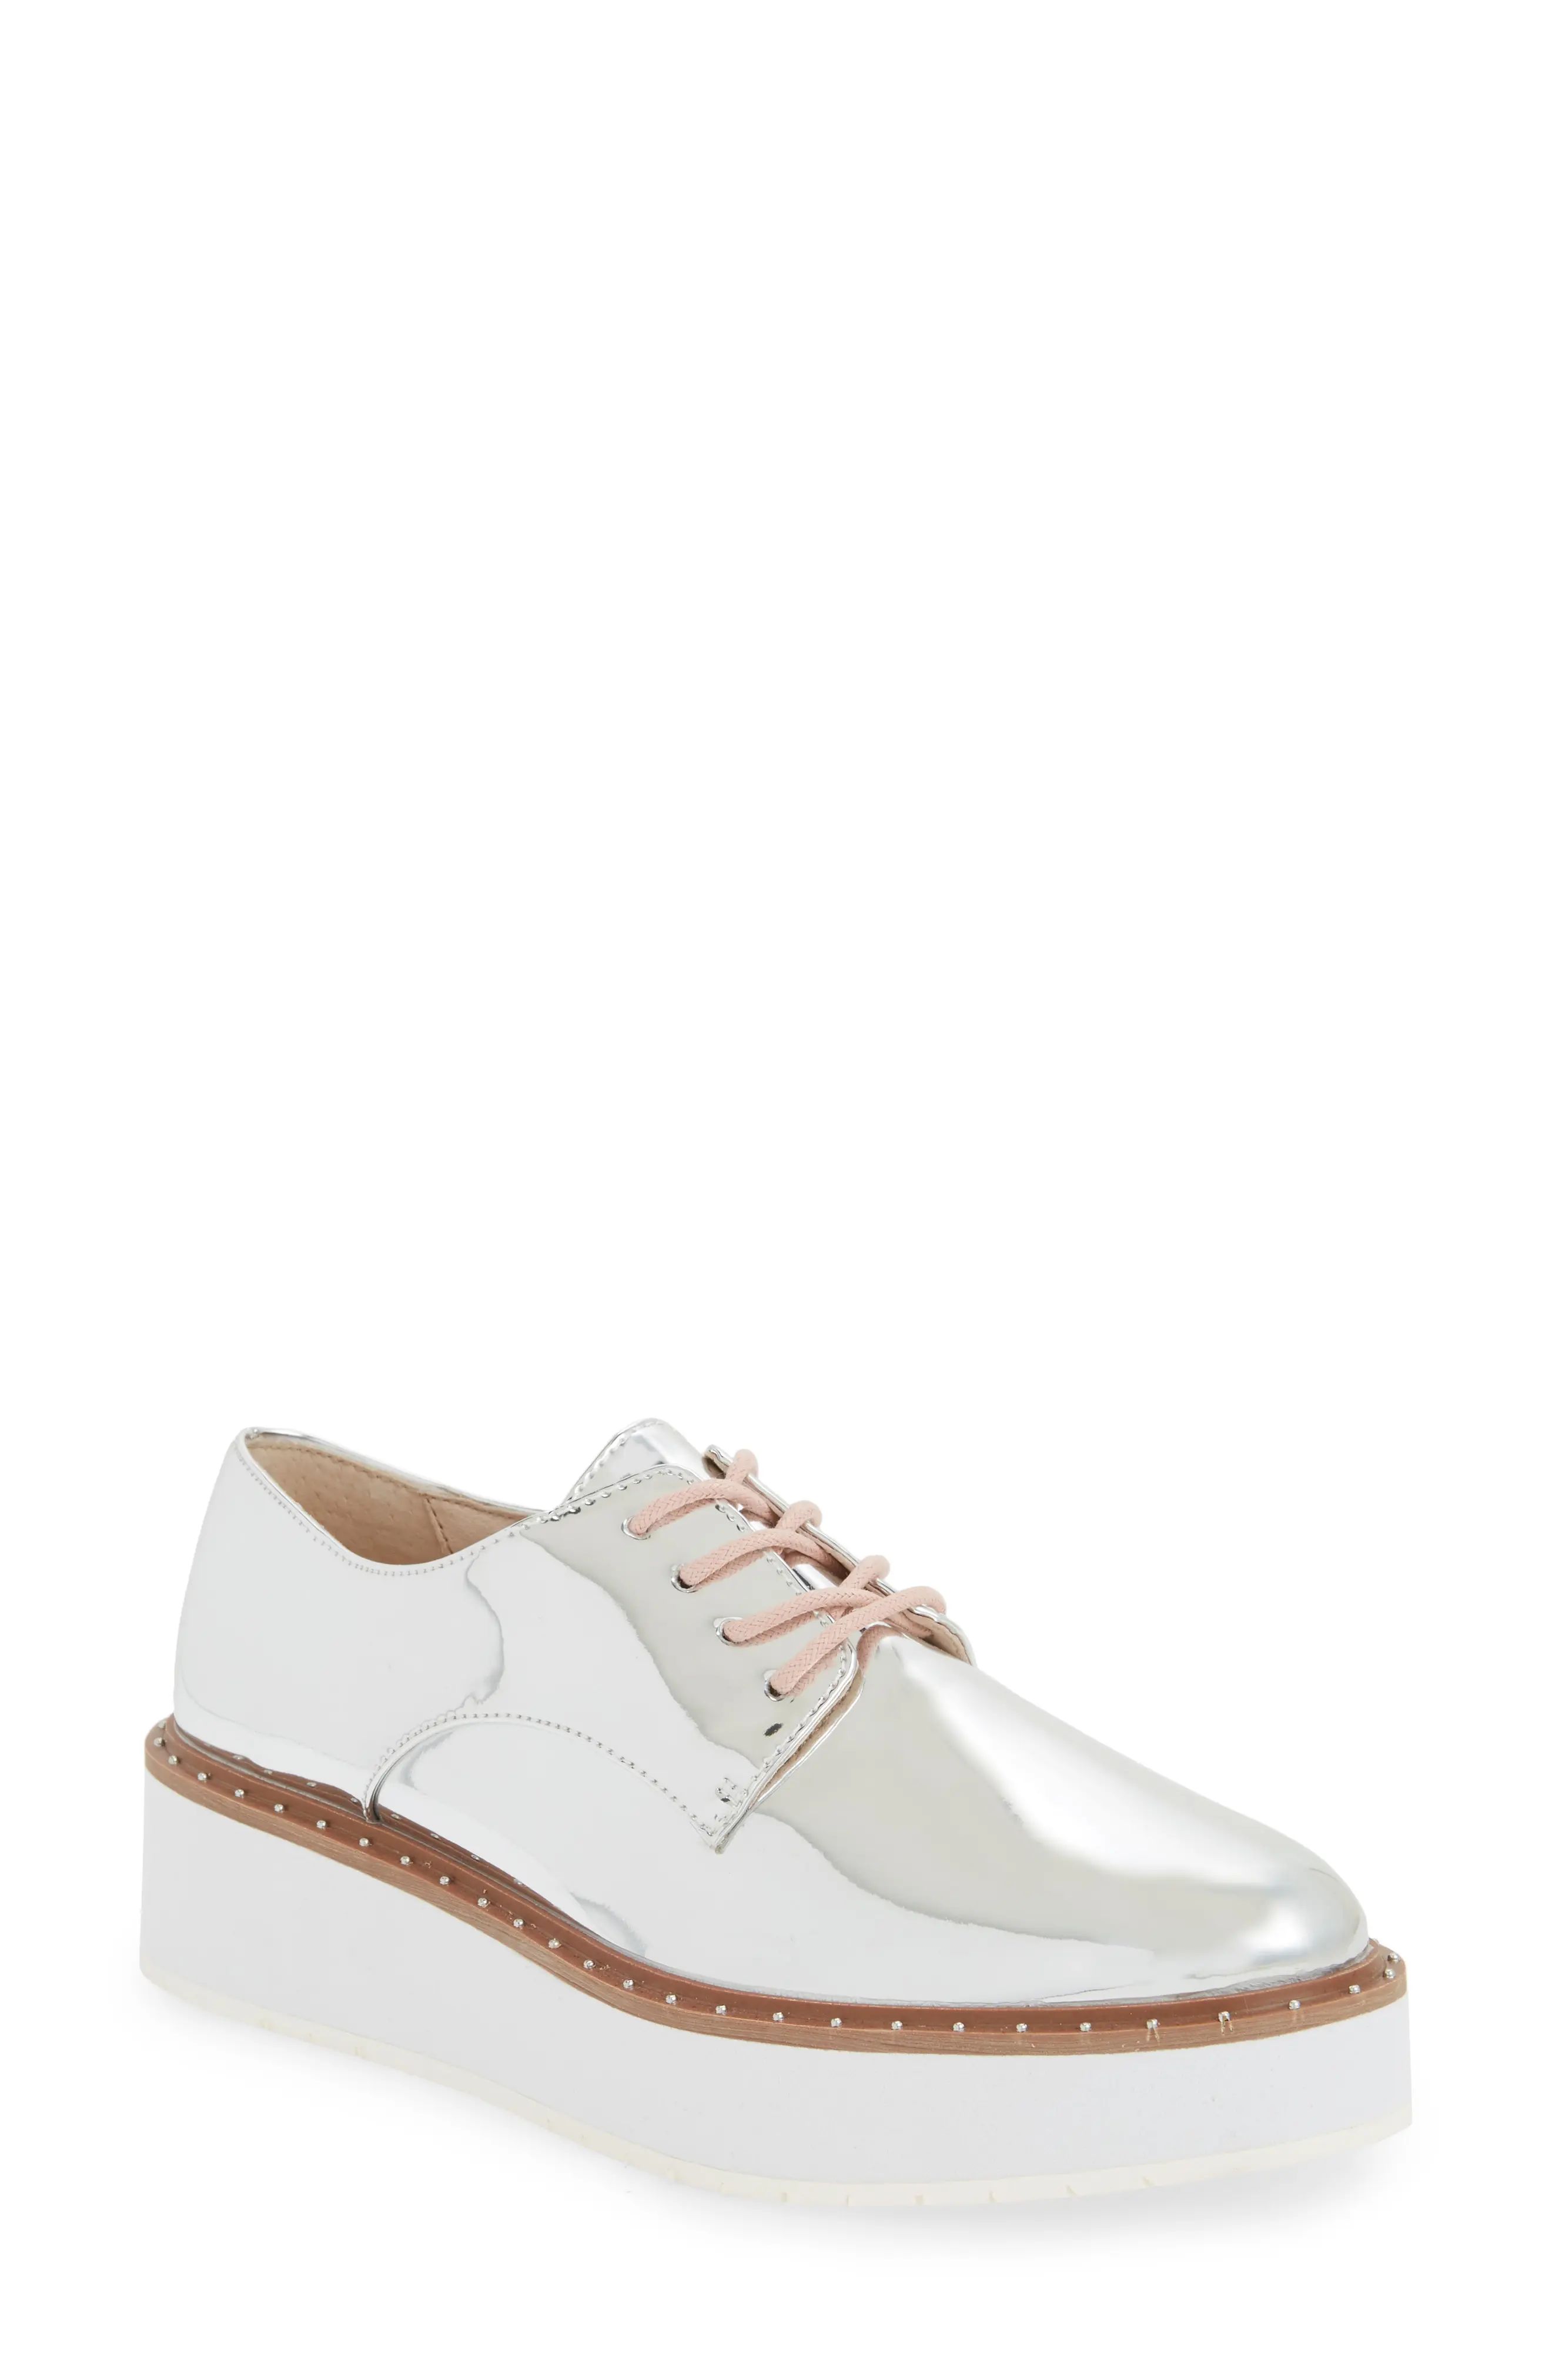 Women's Chinese Laundry Cecilia Platform Oxford | Nordstrom